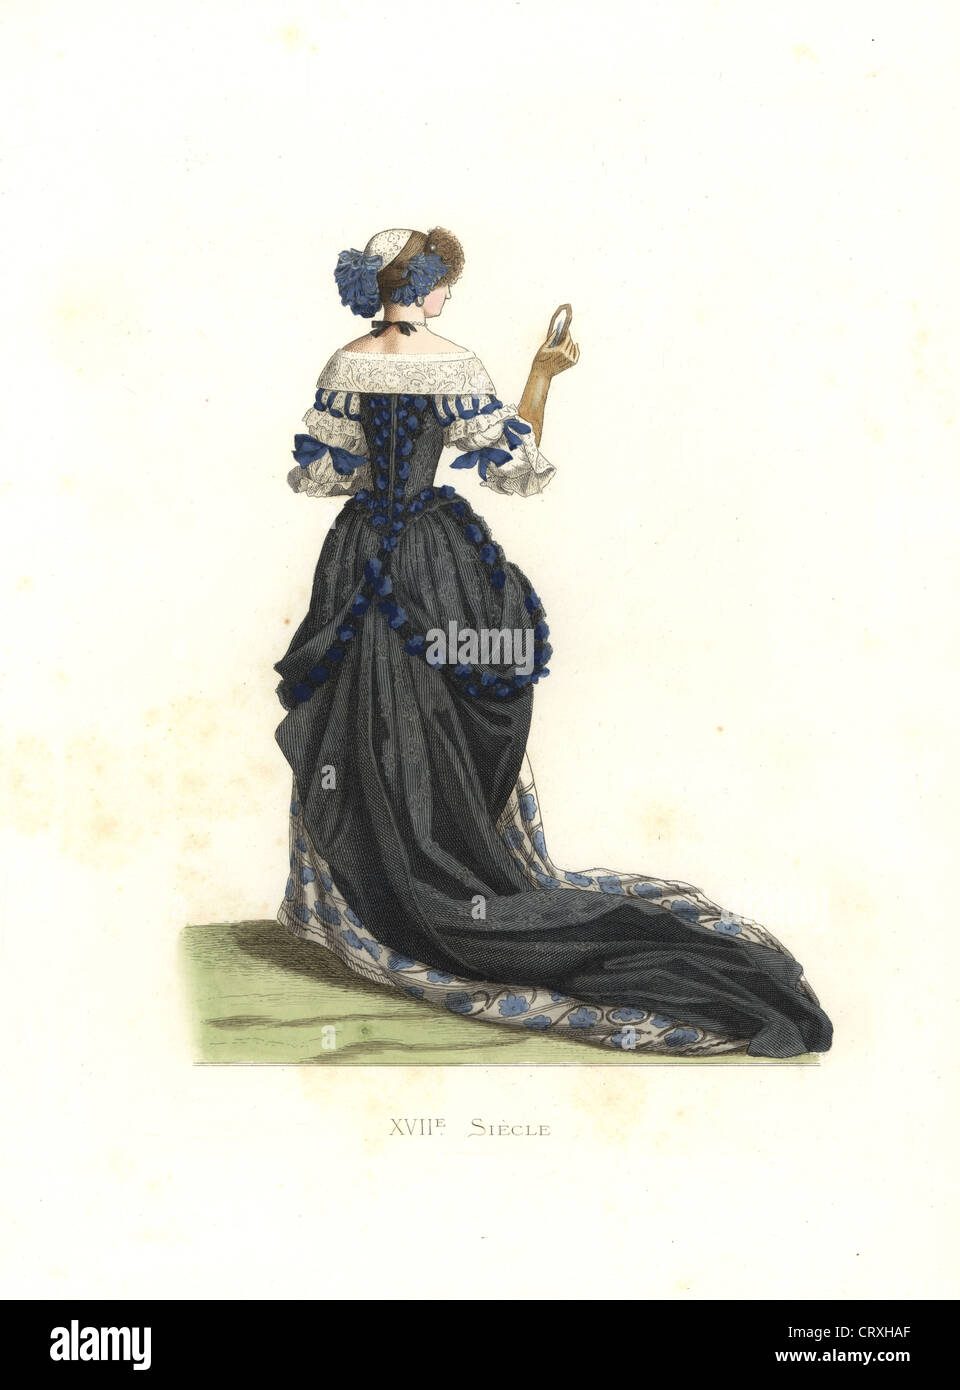 Woman in town costume, 17th century, from a print by Jean de Saint-Jean. Stock Photo